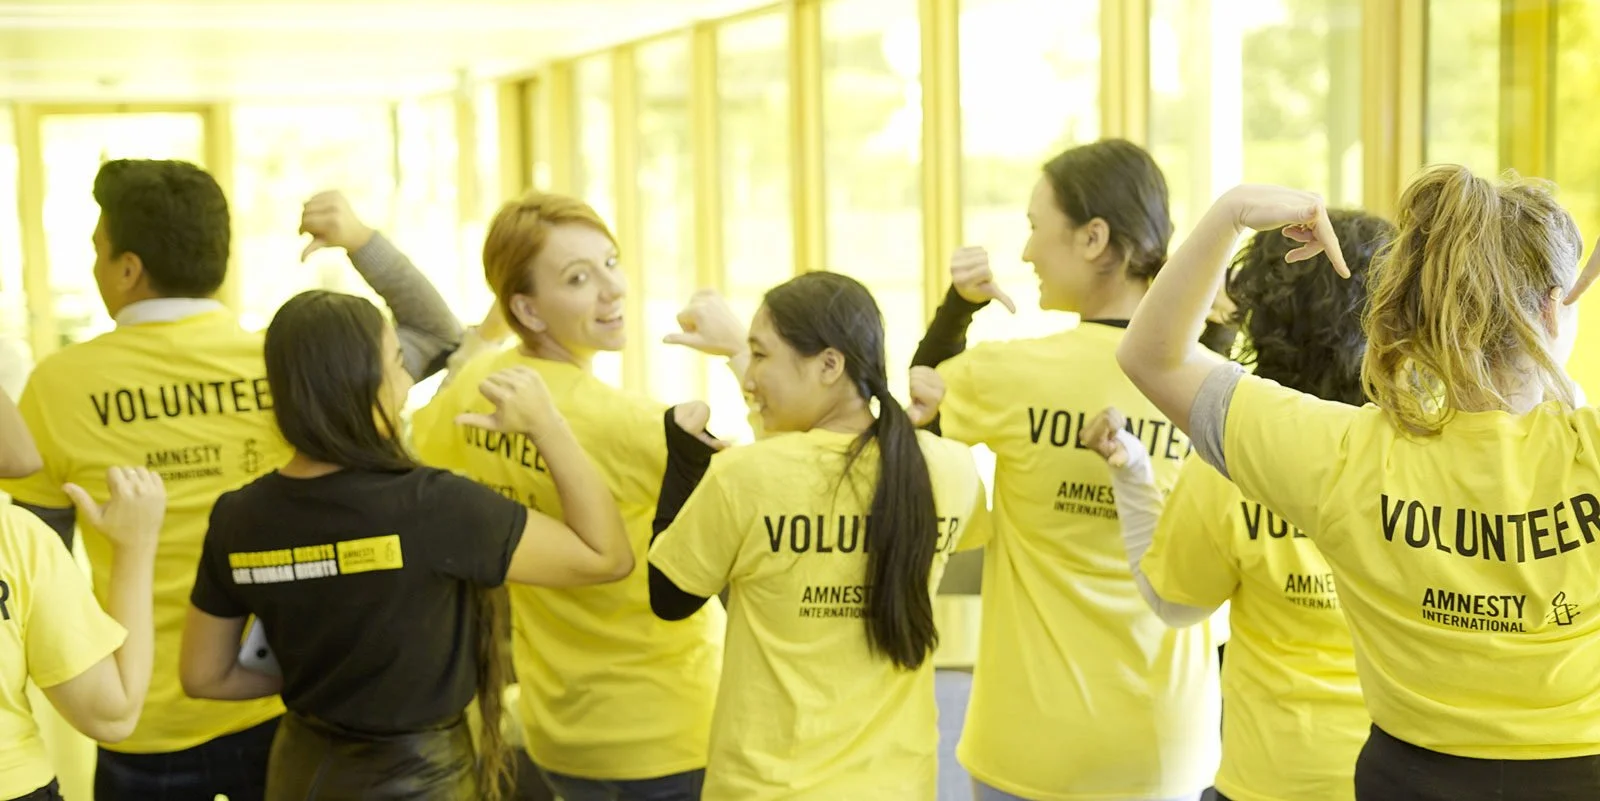 A photo of a group of eight Amnesty volunteers (both men and women) wearing Amnesty tshirts. The volunteers have their backs to the camera and the word 'Volunteer' is emblazoned across the back of their tshirts.